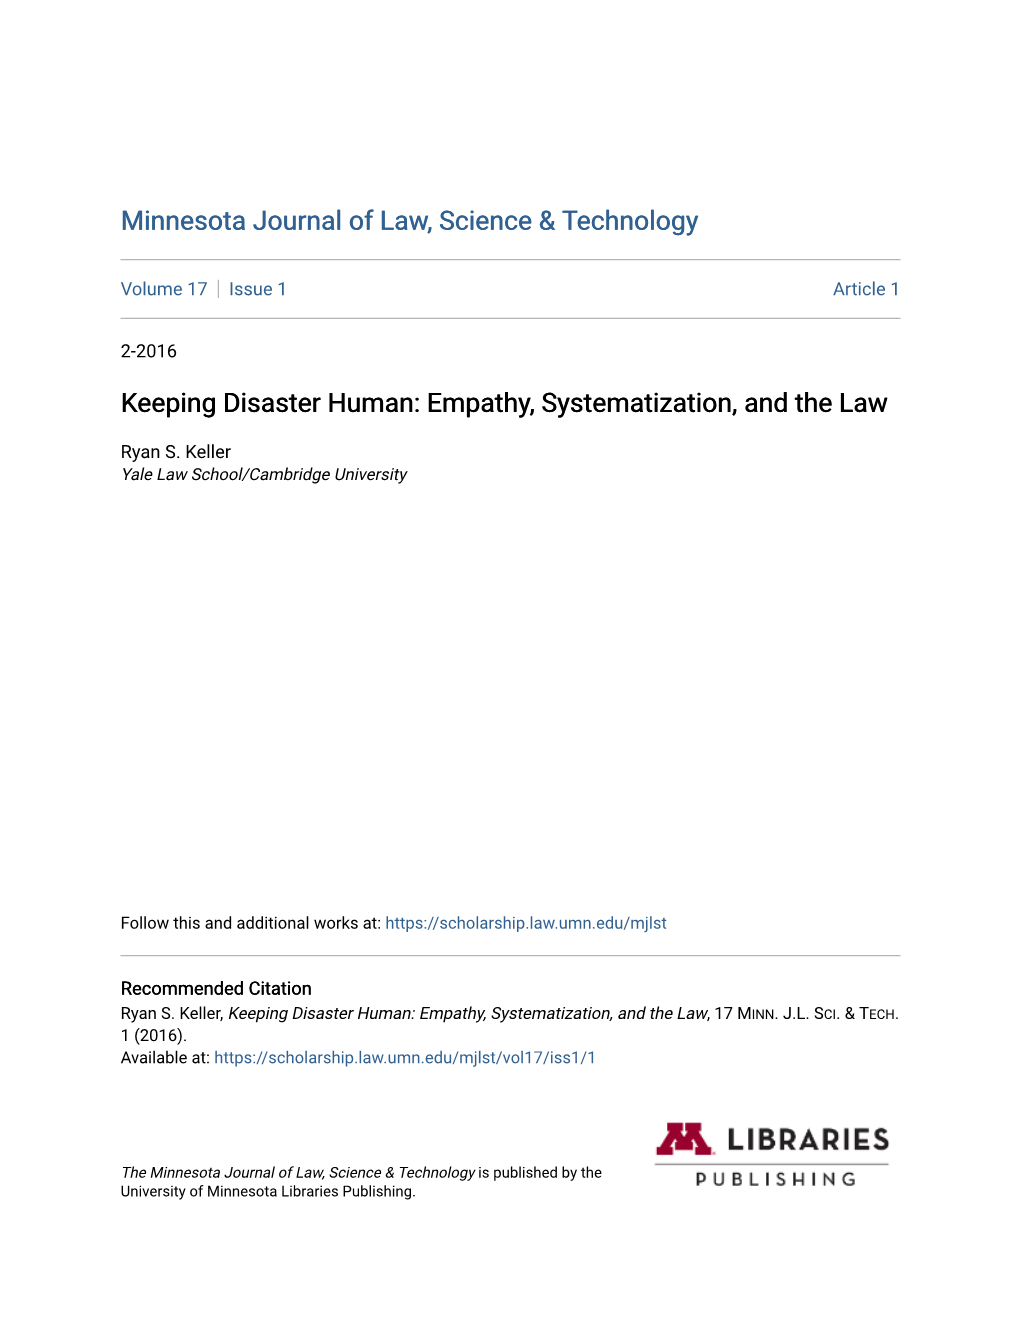 Keeping Disaster Human: Empathy, Systematization, and the Law